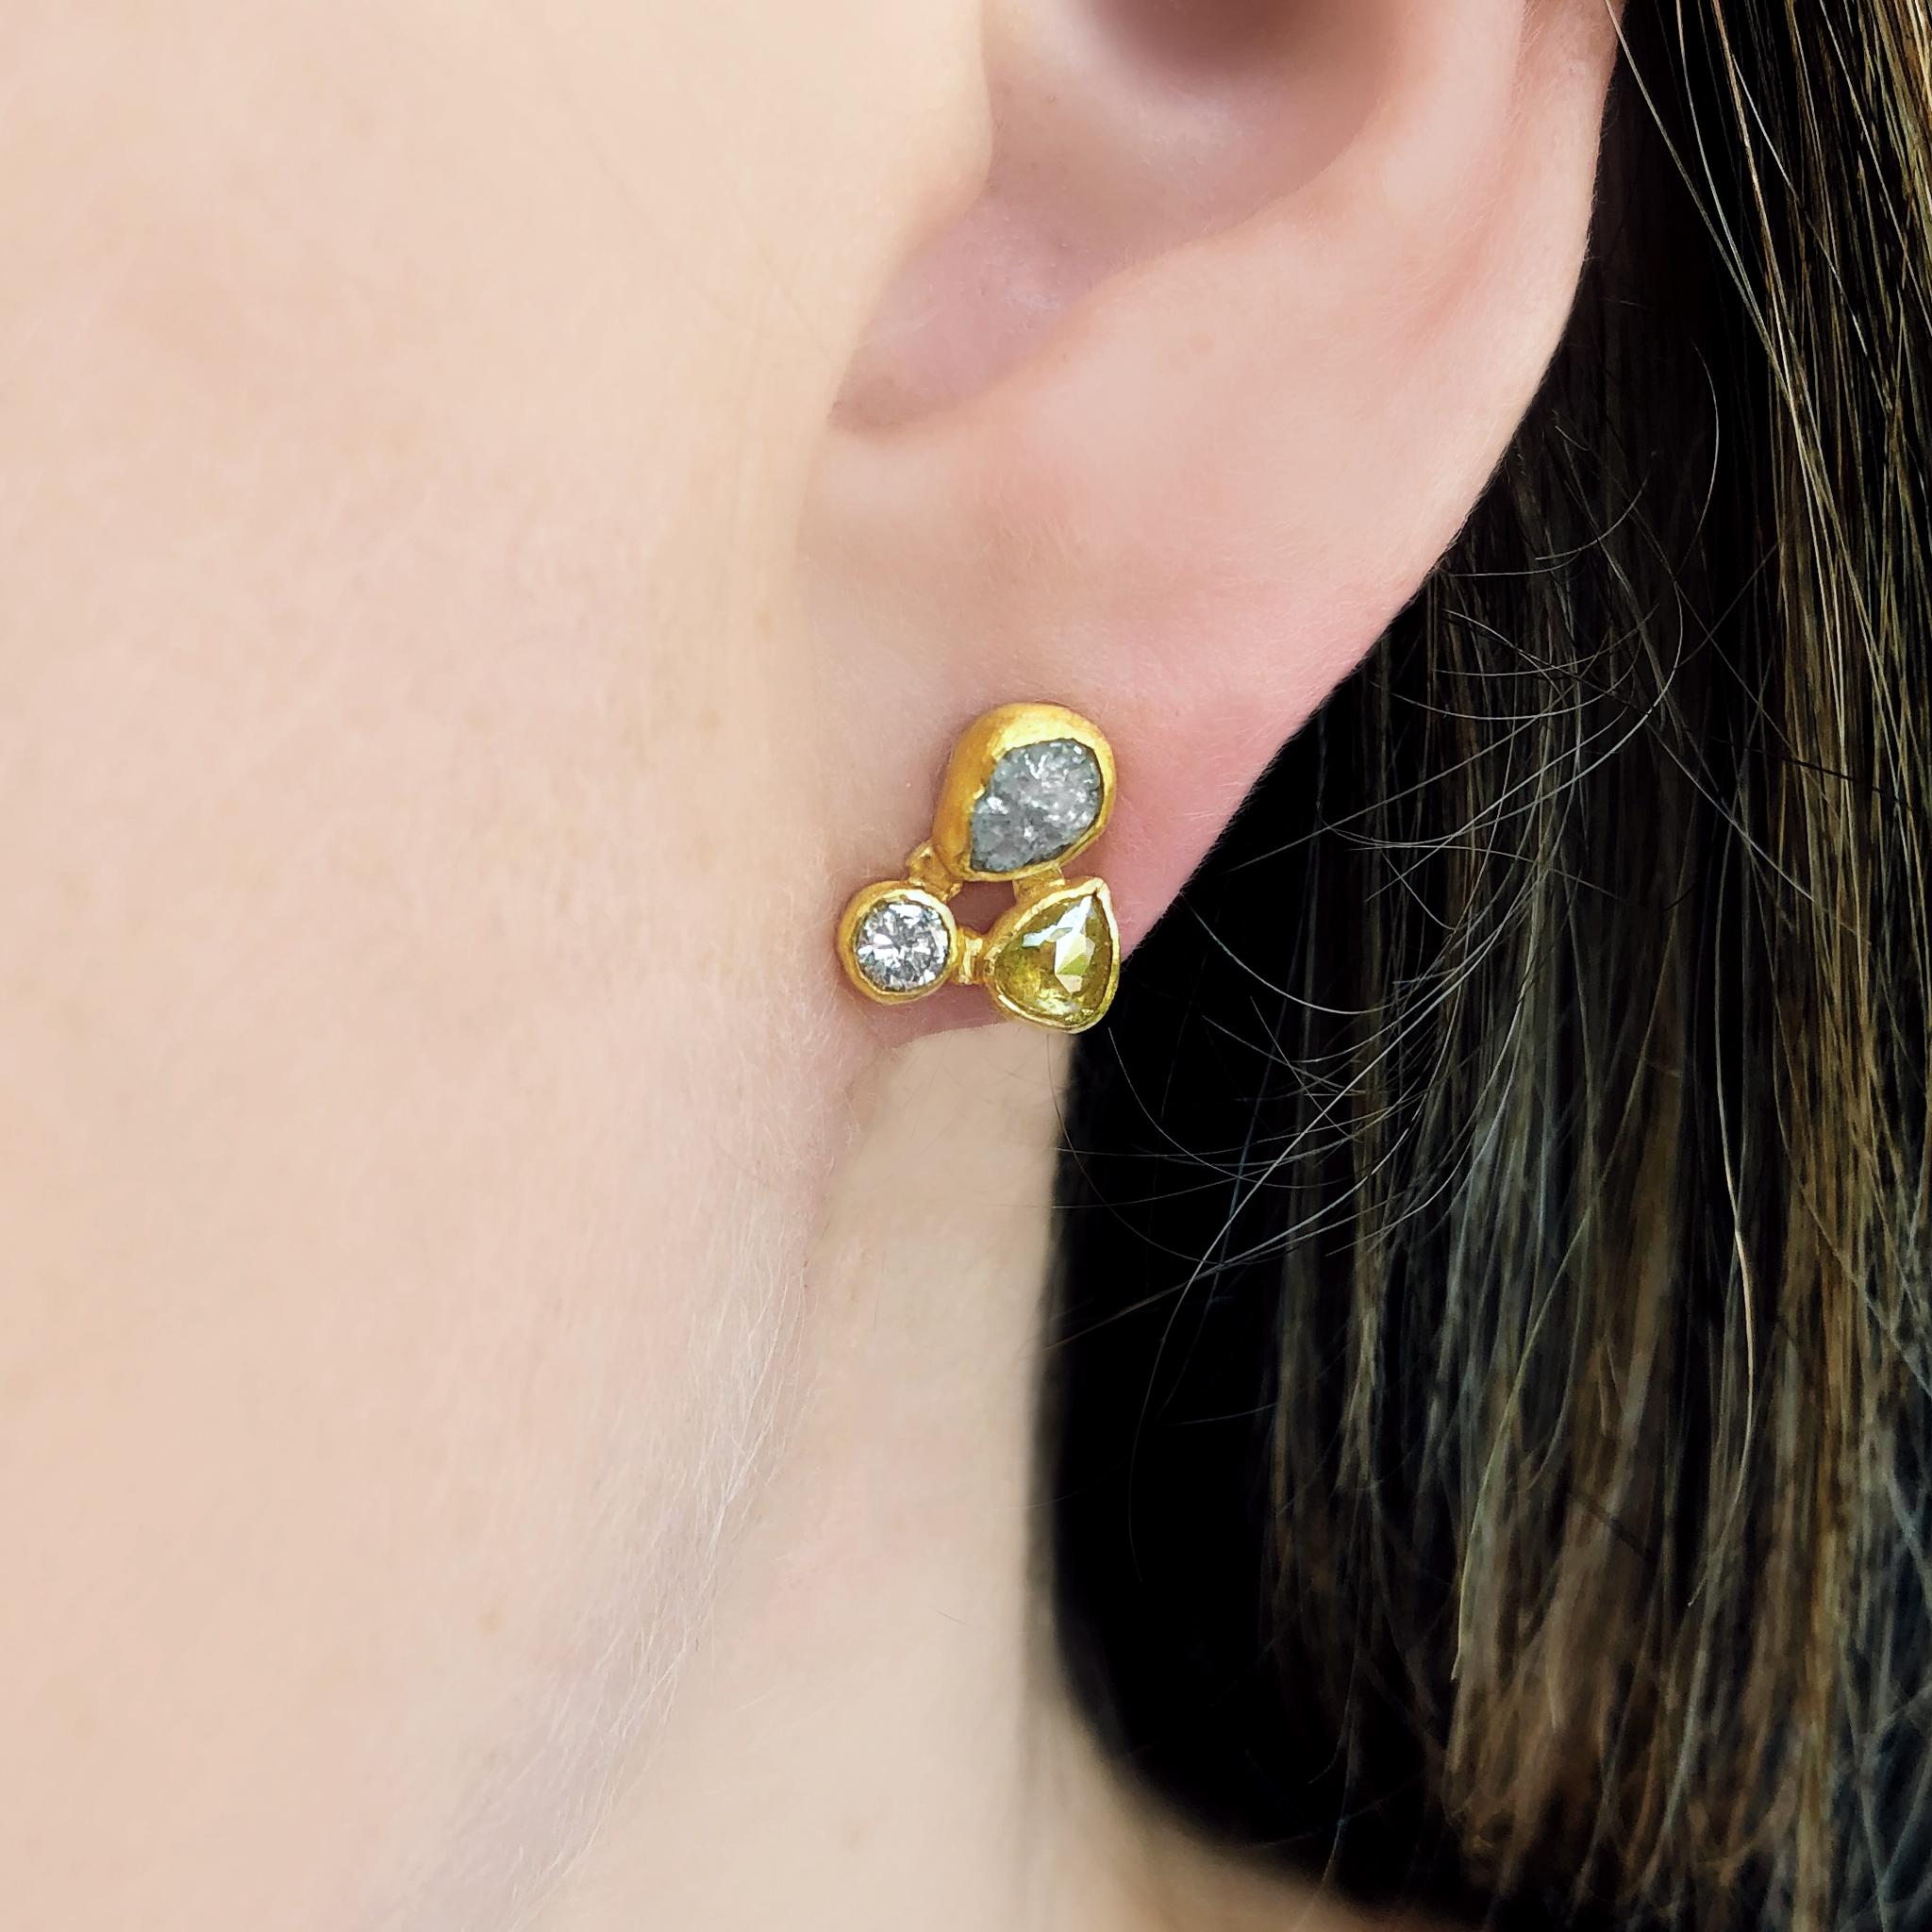 One of a Kind Triple Stud Earrings handcrafted by jewelry maker Petra Class featuring 5.7 total carats of natural round brilliant-cut white diamonds, pear rose-cut champagne diamonds, and silver diamond crystals bezel-set in signature-finished 22k